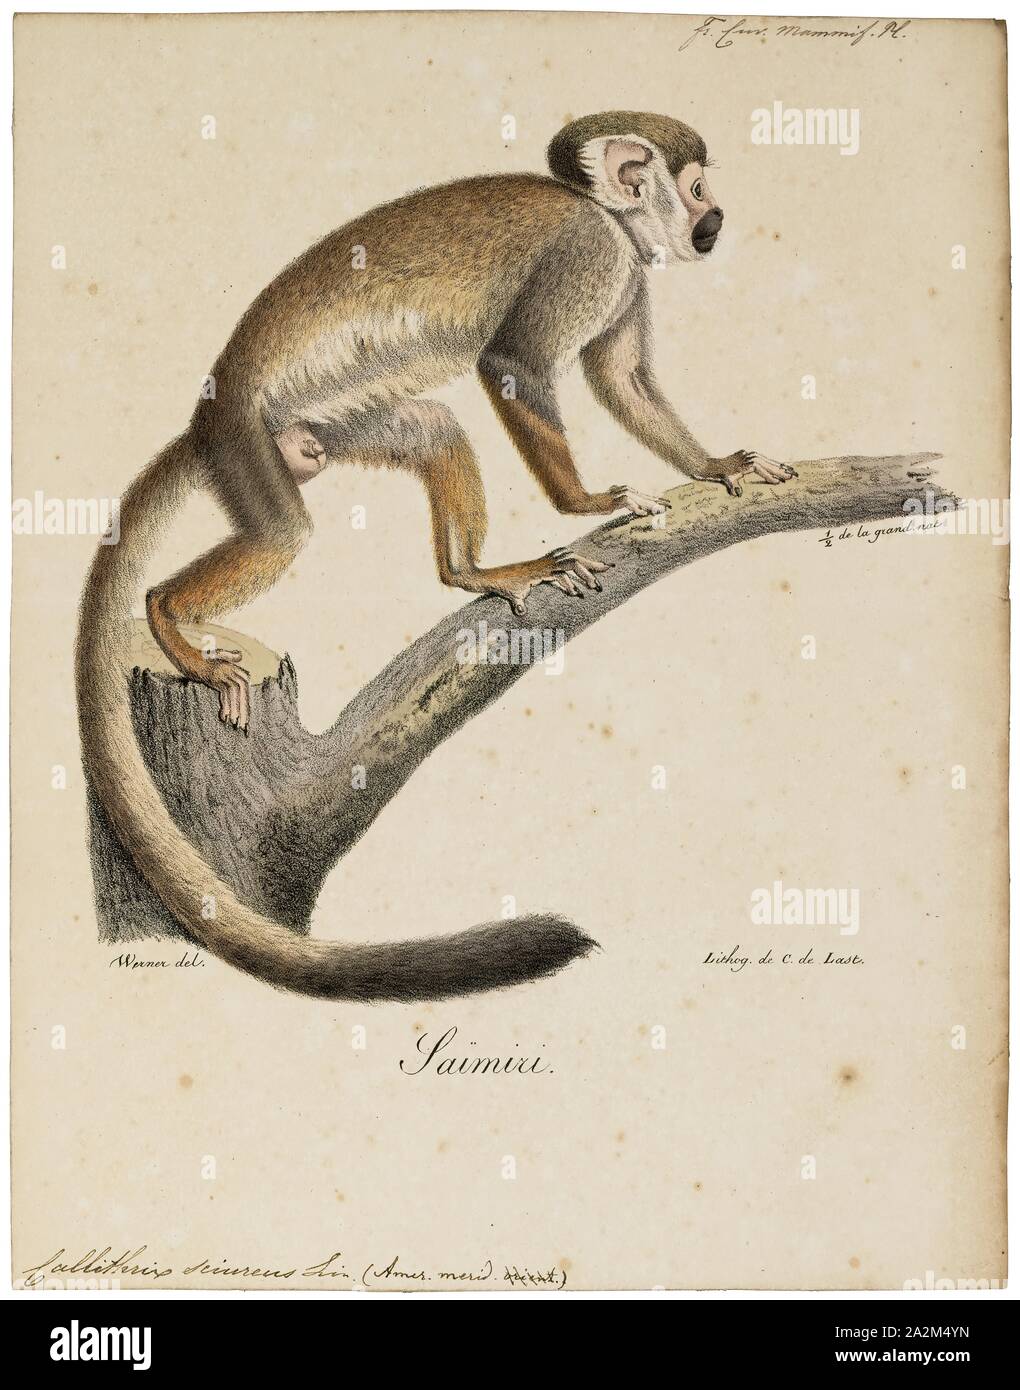 Callithrix sciureus, Print, Callithrix is a genus of New World monkeys of the family Callitrichidae, the family containing marmosets and tamarins. The genus contains the Atlantic Forest marmosets. The name Callithrix is derived from the Greek words kallos, meaning beautiful, and thrix, meaning hair., 1818-1842 Stock Photo